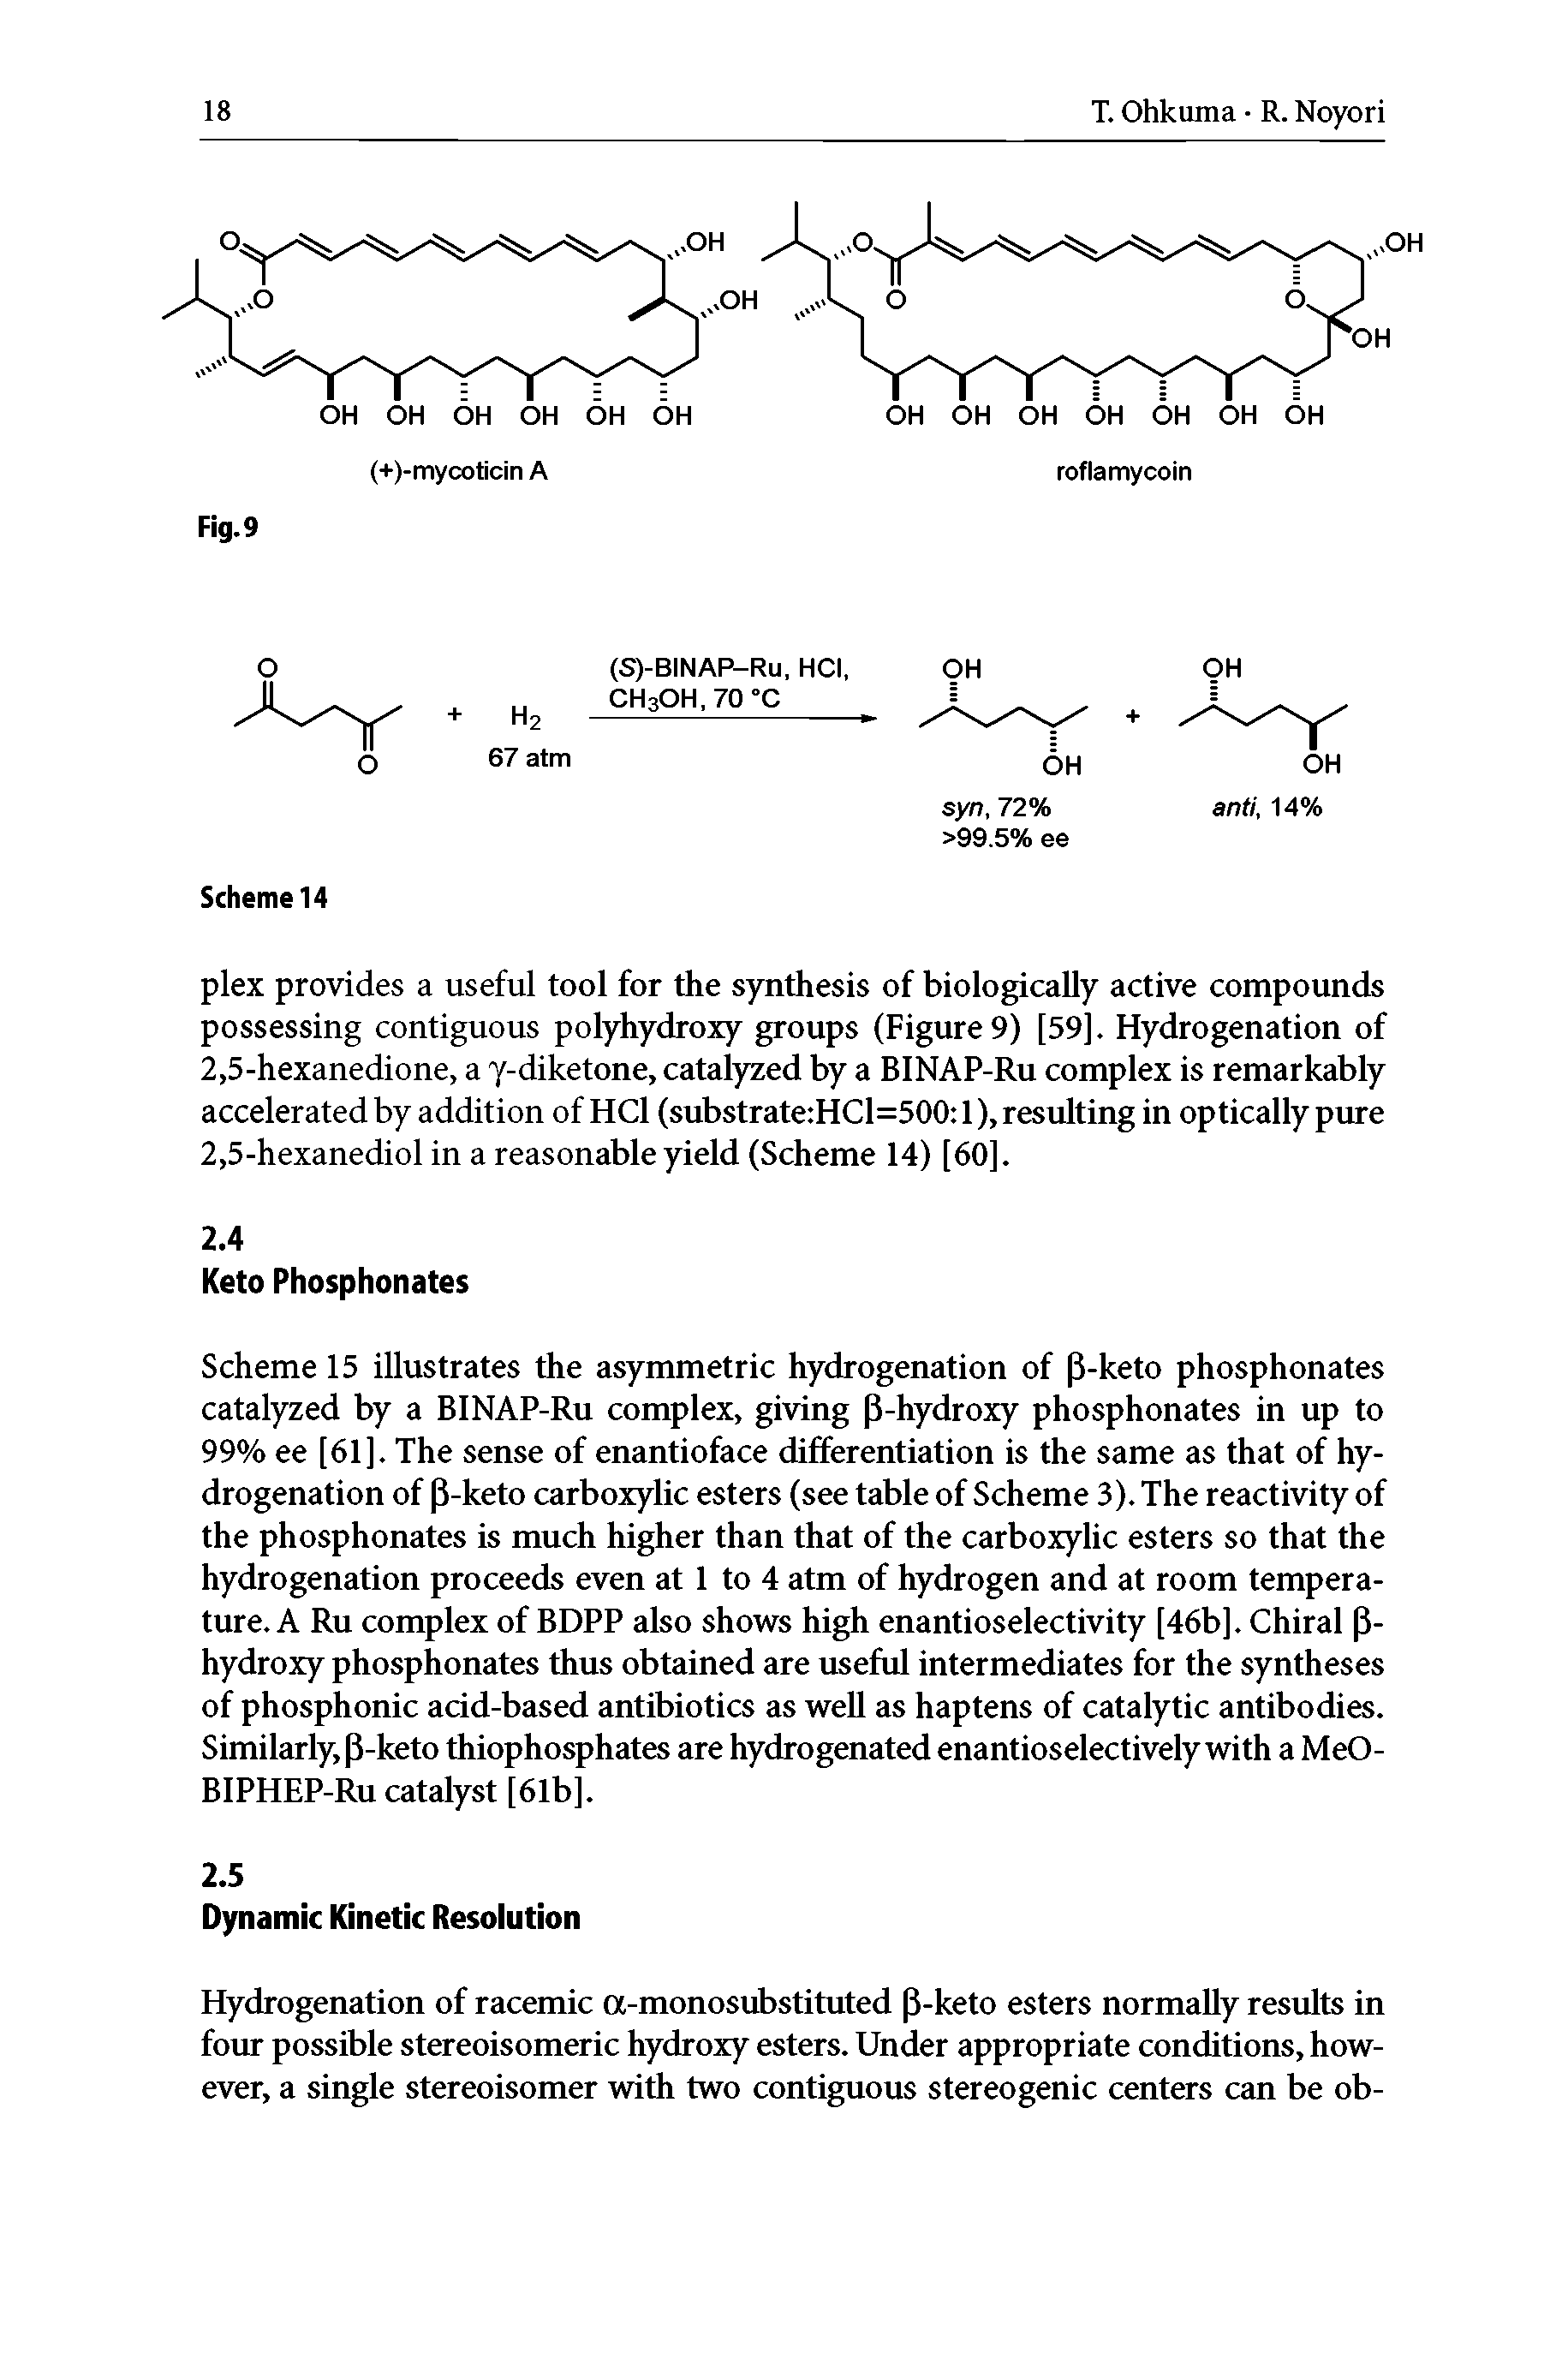 Scheme 15 illustrates the asymmetric hydrogenation of 3-keto phosphonates catalyzed by a BINAP-Ru complex, giving P-hydroxy phosphonates in up to 99% ee [61]. The sense of enantioface differentiation is the same as that of hydrogenation of P-keto carboxylic esters (see table of Scheme 3). The reactivity of the phosphonates is much higher than that of the carboxylic esters so that the hydrogenation proceeds even at 1 to 4 atm of hydrogen and at room temperature. A Ru complex of BDPP also shows high enantioselectivity [46b]. Chiral P-hydroxy phosphonates thus obtained are useful intermediates for the syntheses of phosphonic acid-based antibiotics as well as haptens of catalytic antibodies. Similarly, P-keto thiophosphates are hydrogenated enantioselectively with a MeO-BIPHEP-Ru catalyst [61b].